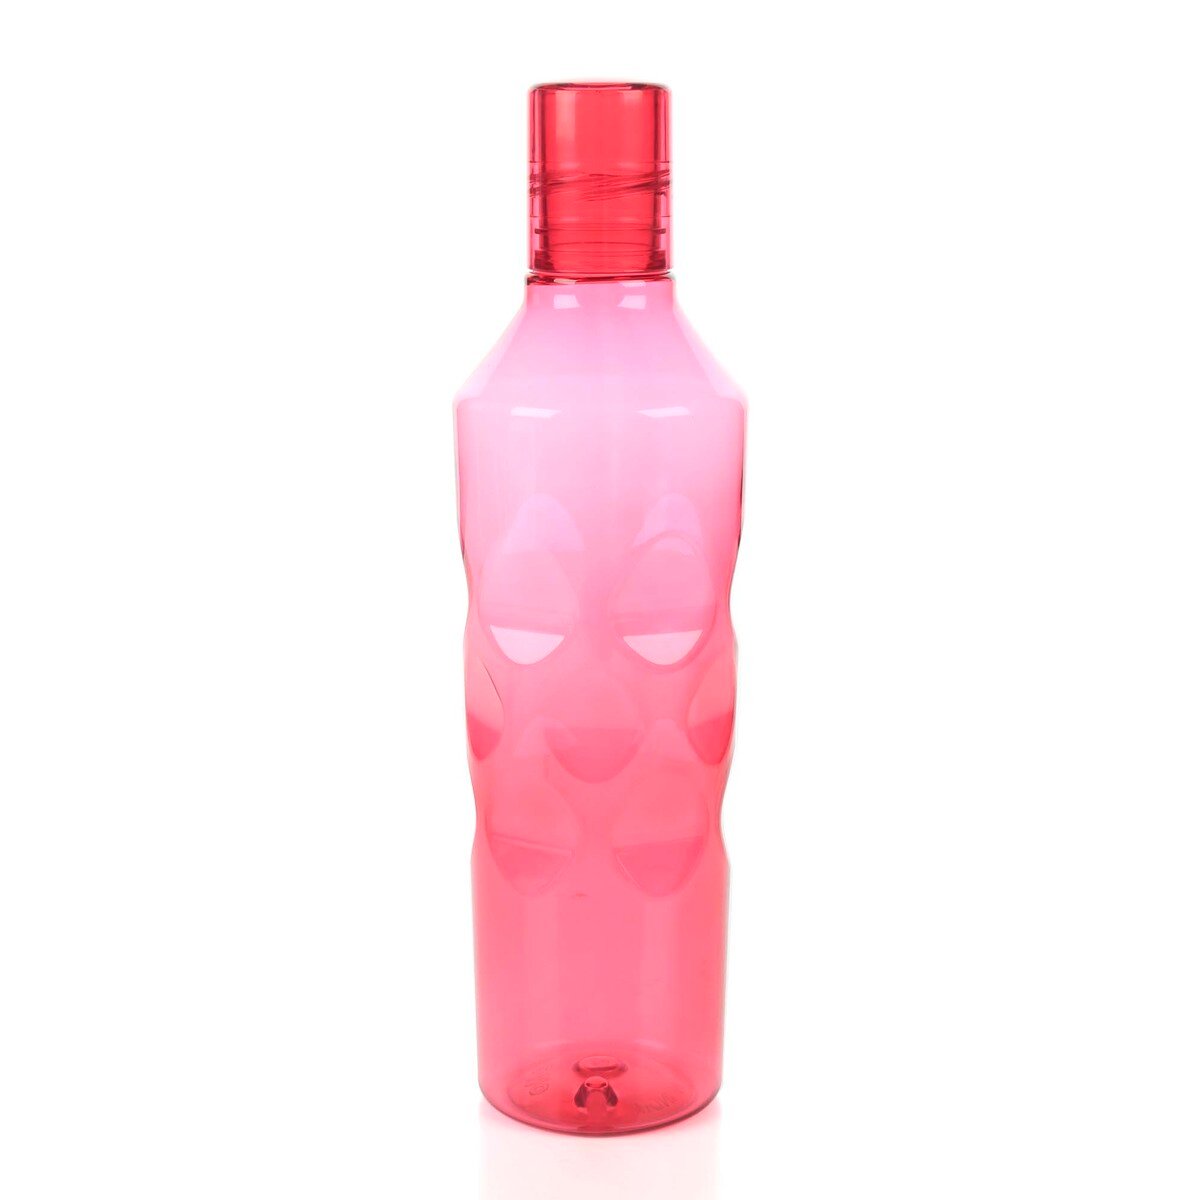 Cello Mozzy Plastic Water Bottle, 1 L, Pink, Mozzy1000